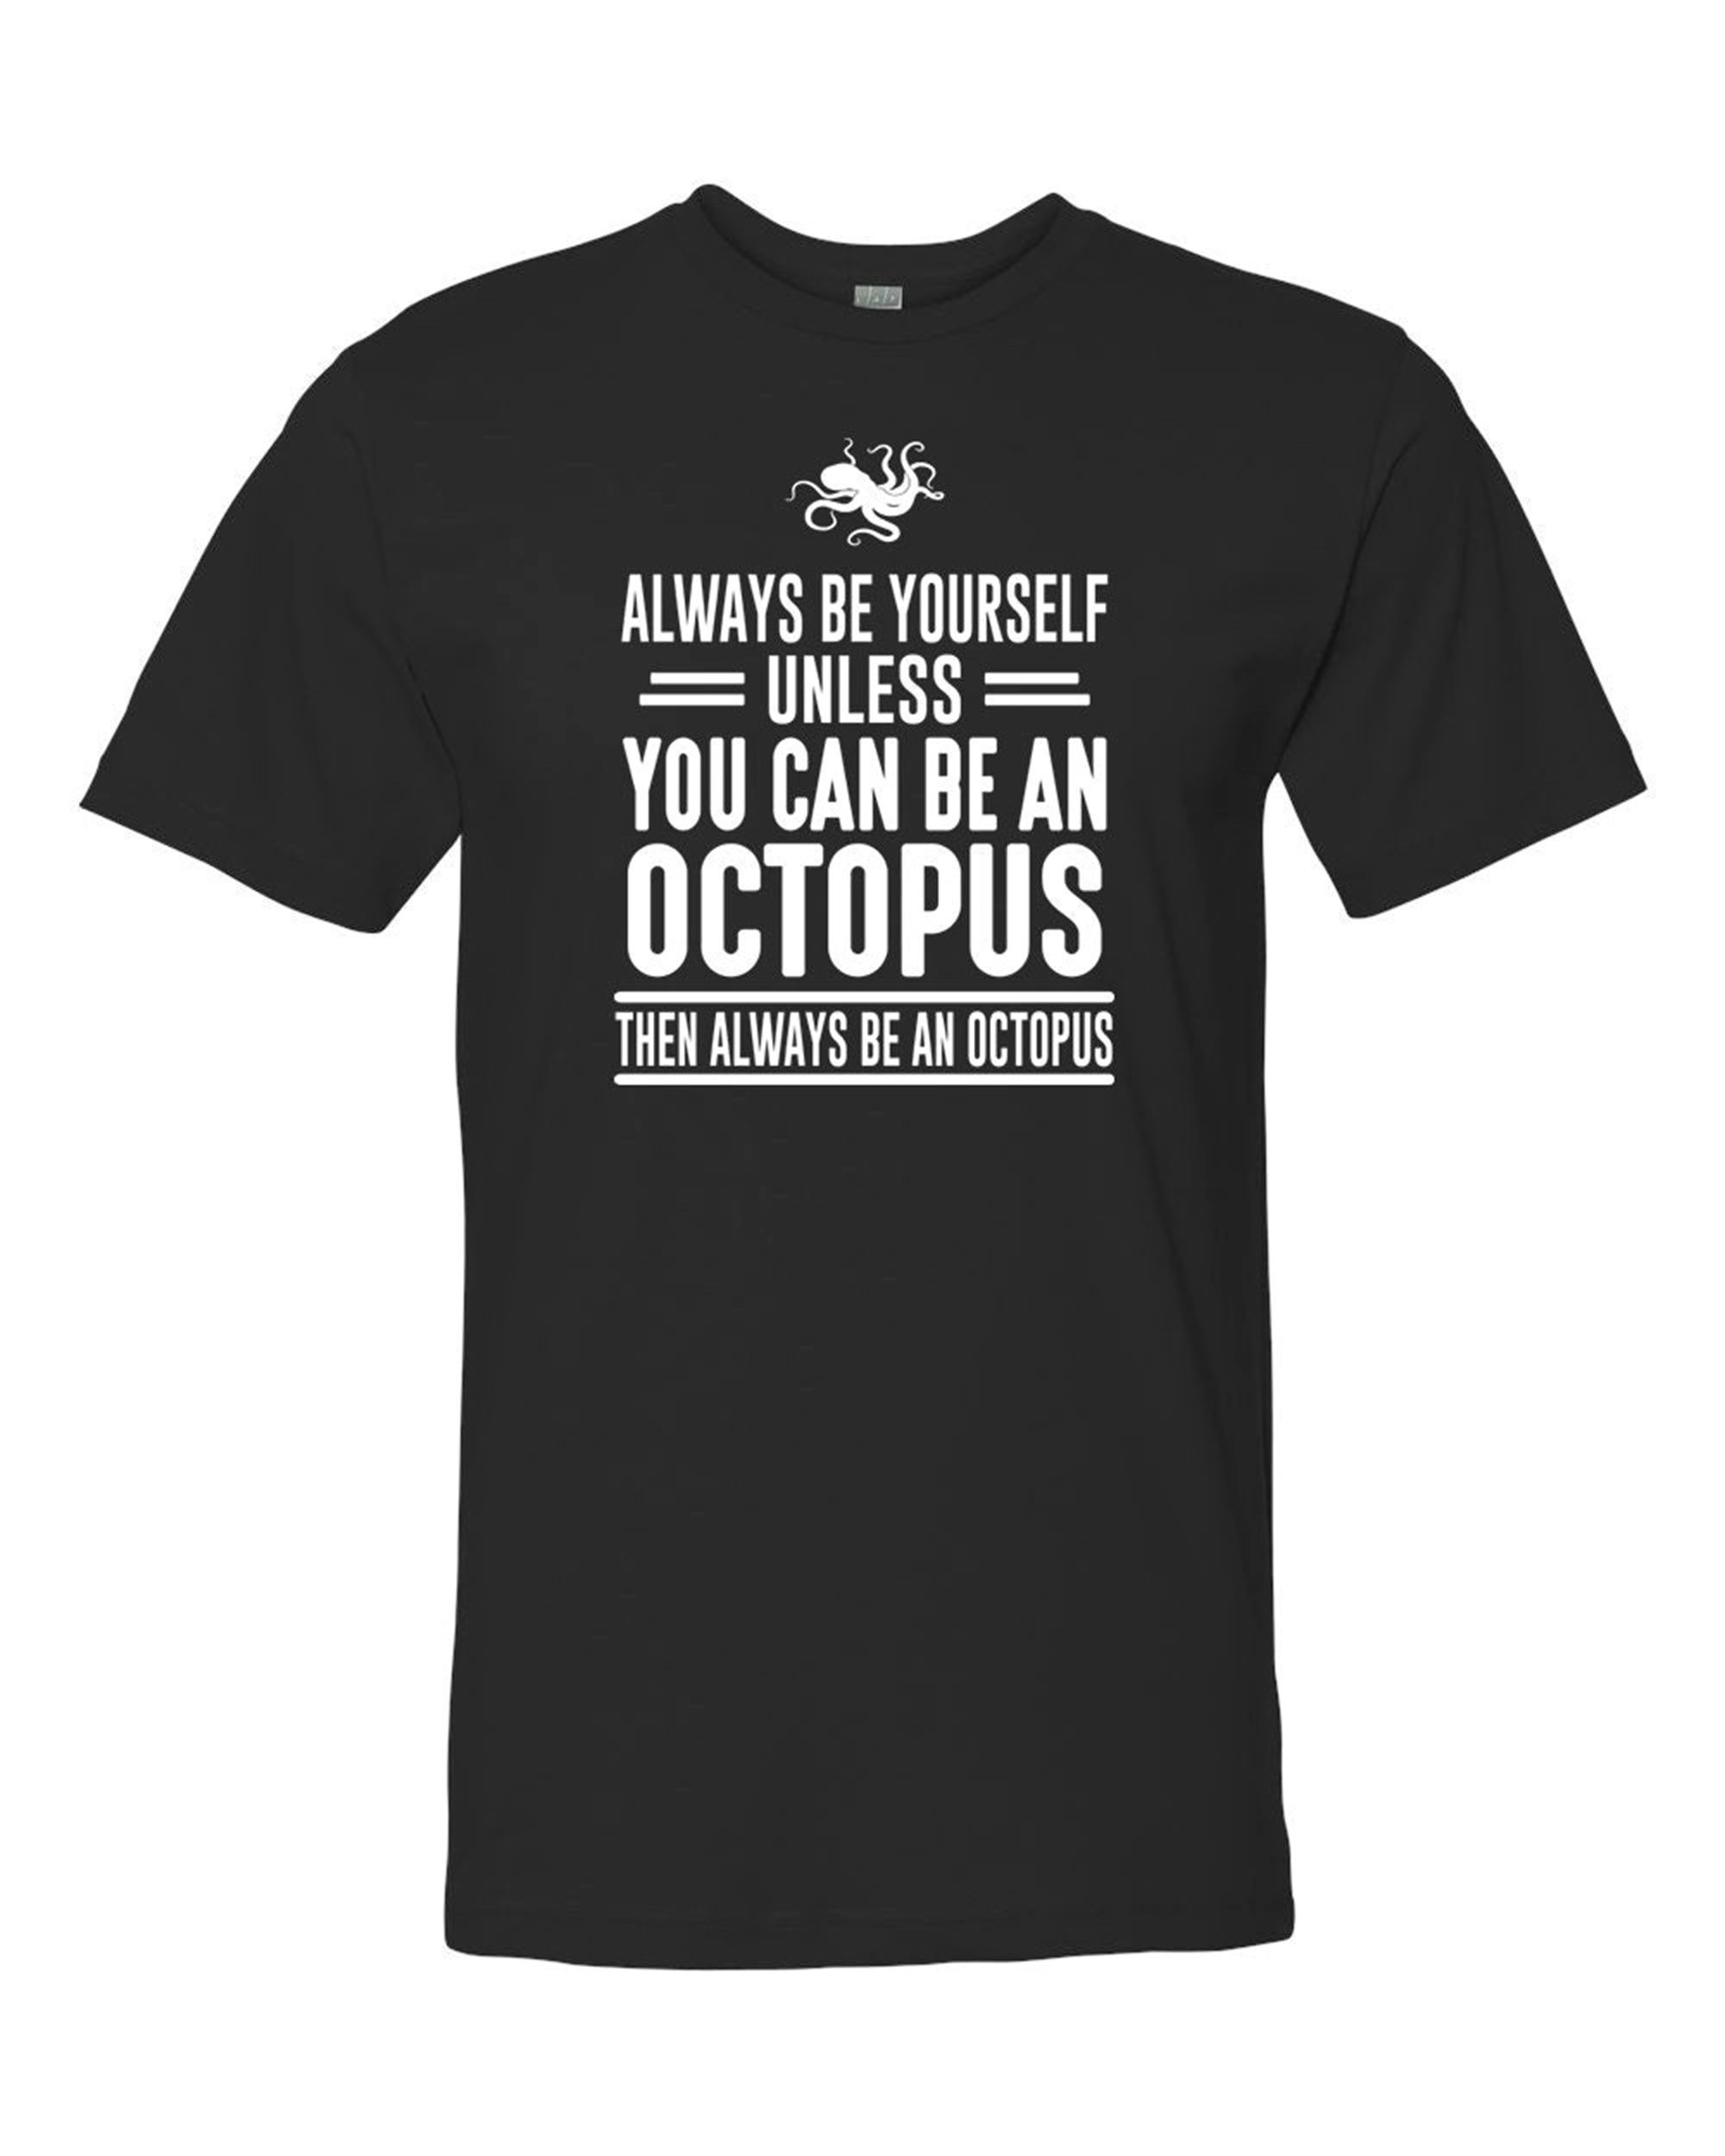 Gifts Always Be Yourself Unless You Can Be An Octopus Then Always Be An Octopus - Unisex Shirt - Octopus Shirt - Octopus Gift 